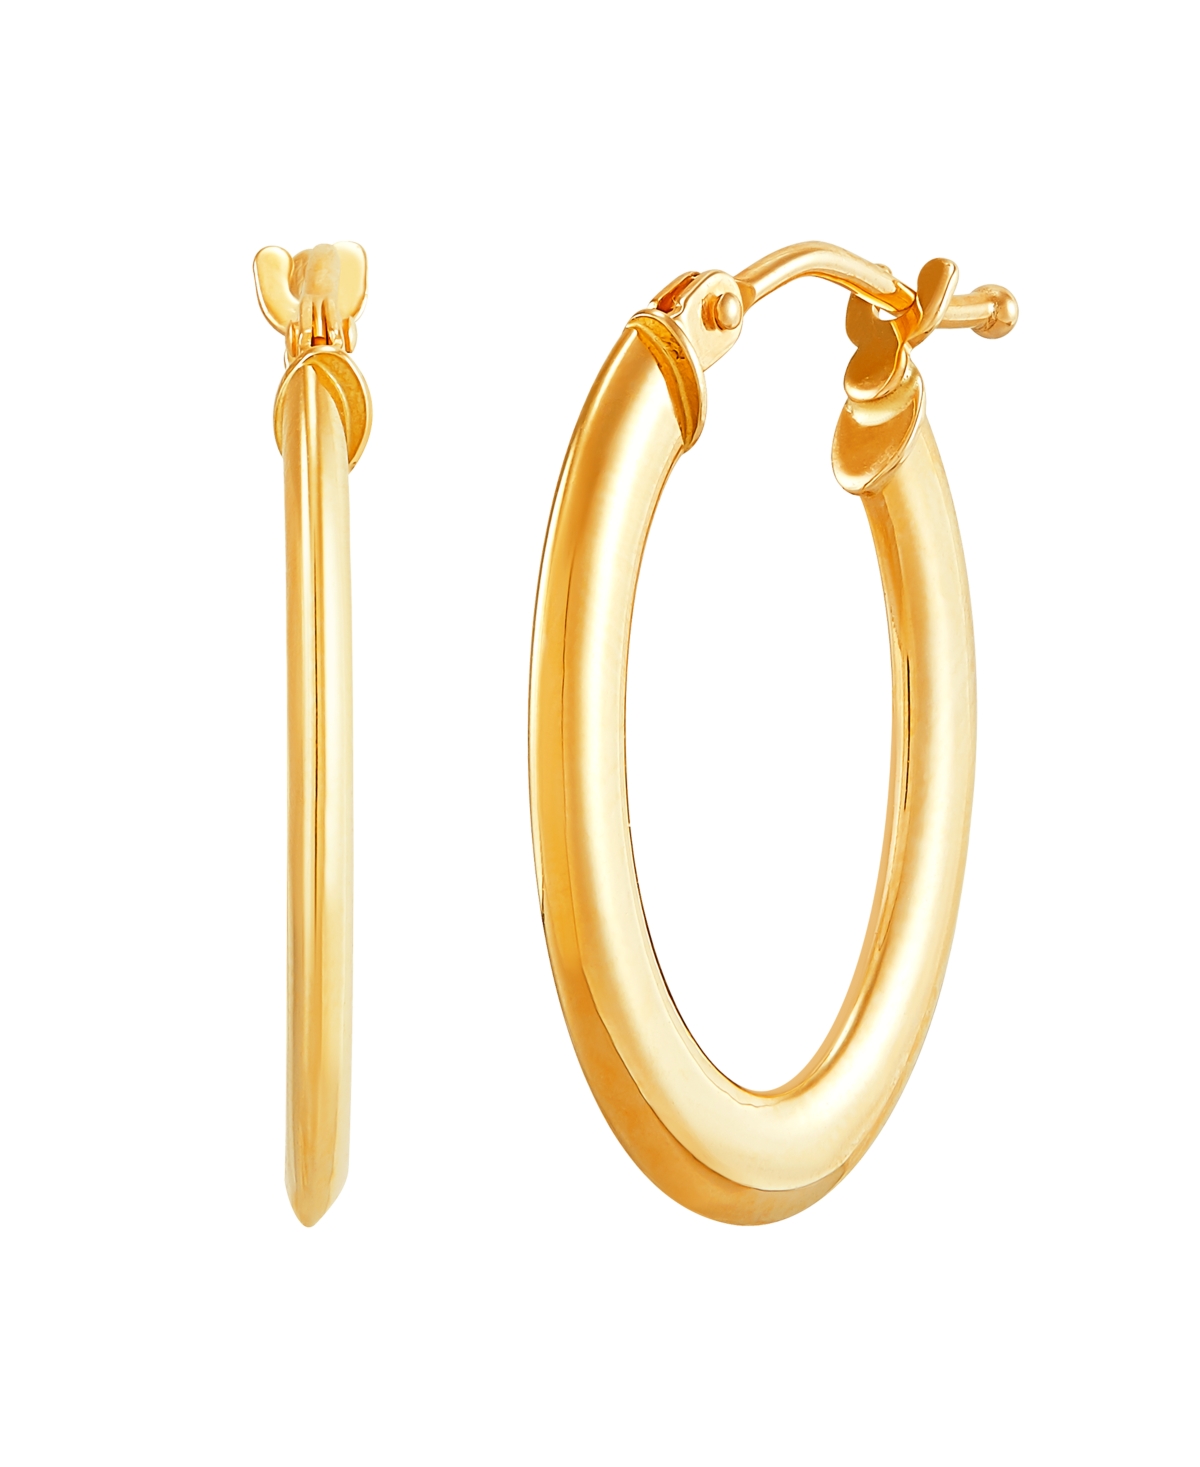 Polished Small Oval Hoop Earrings in 10K Yellow Gold, 1/2" - Yellow Gold